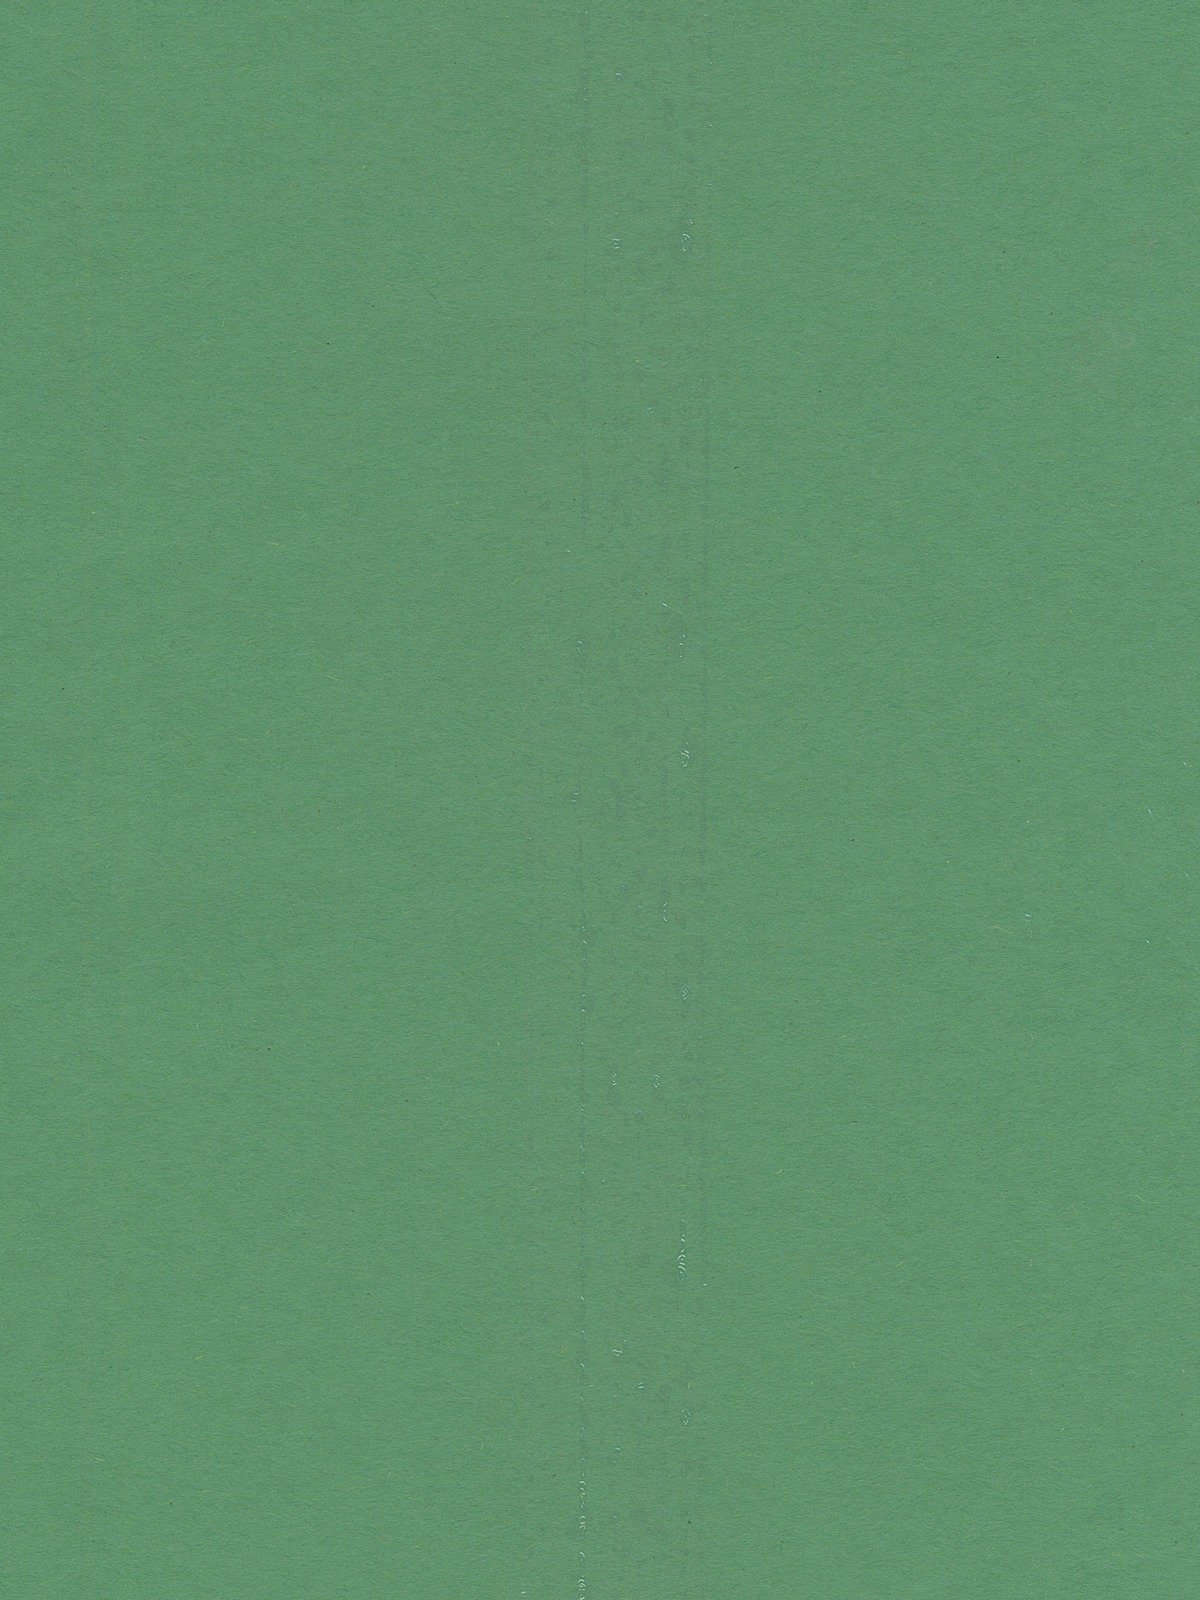 Pacon Sunworks Construction Paper (Green) - 12 In. x 18 In.